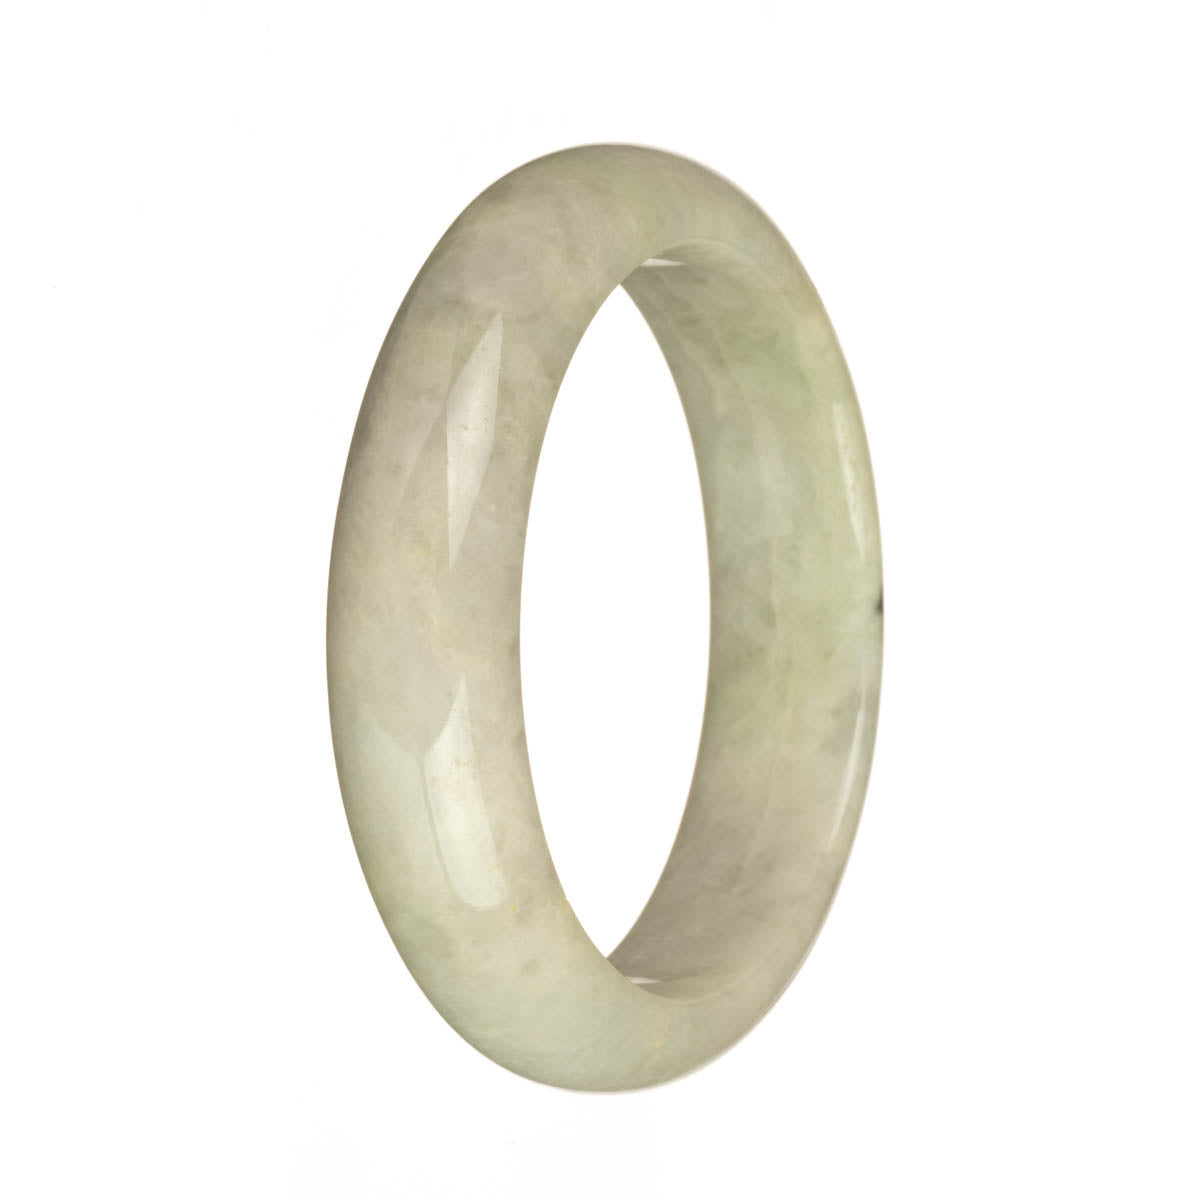 Close-up photo of a jade bangle, showcasing its genuine Type A greyish white color with a deep green spot. The bangle has a 58mm diameter and a half-moon shape. It is a product from the brand MAYS™.